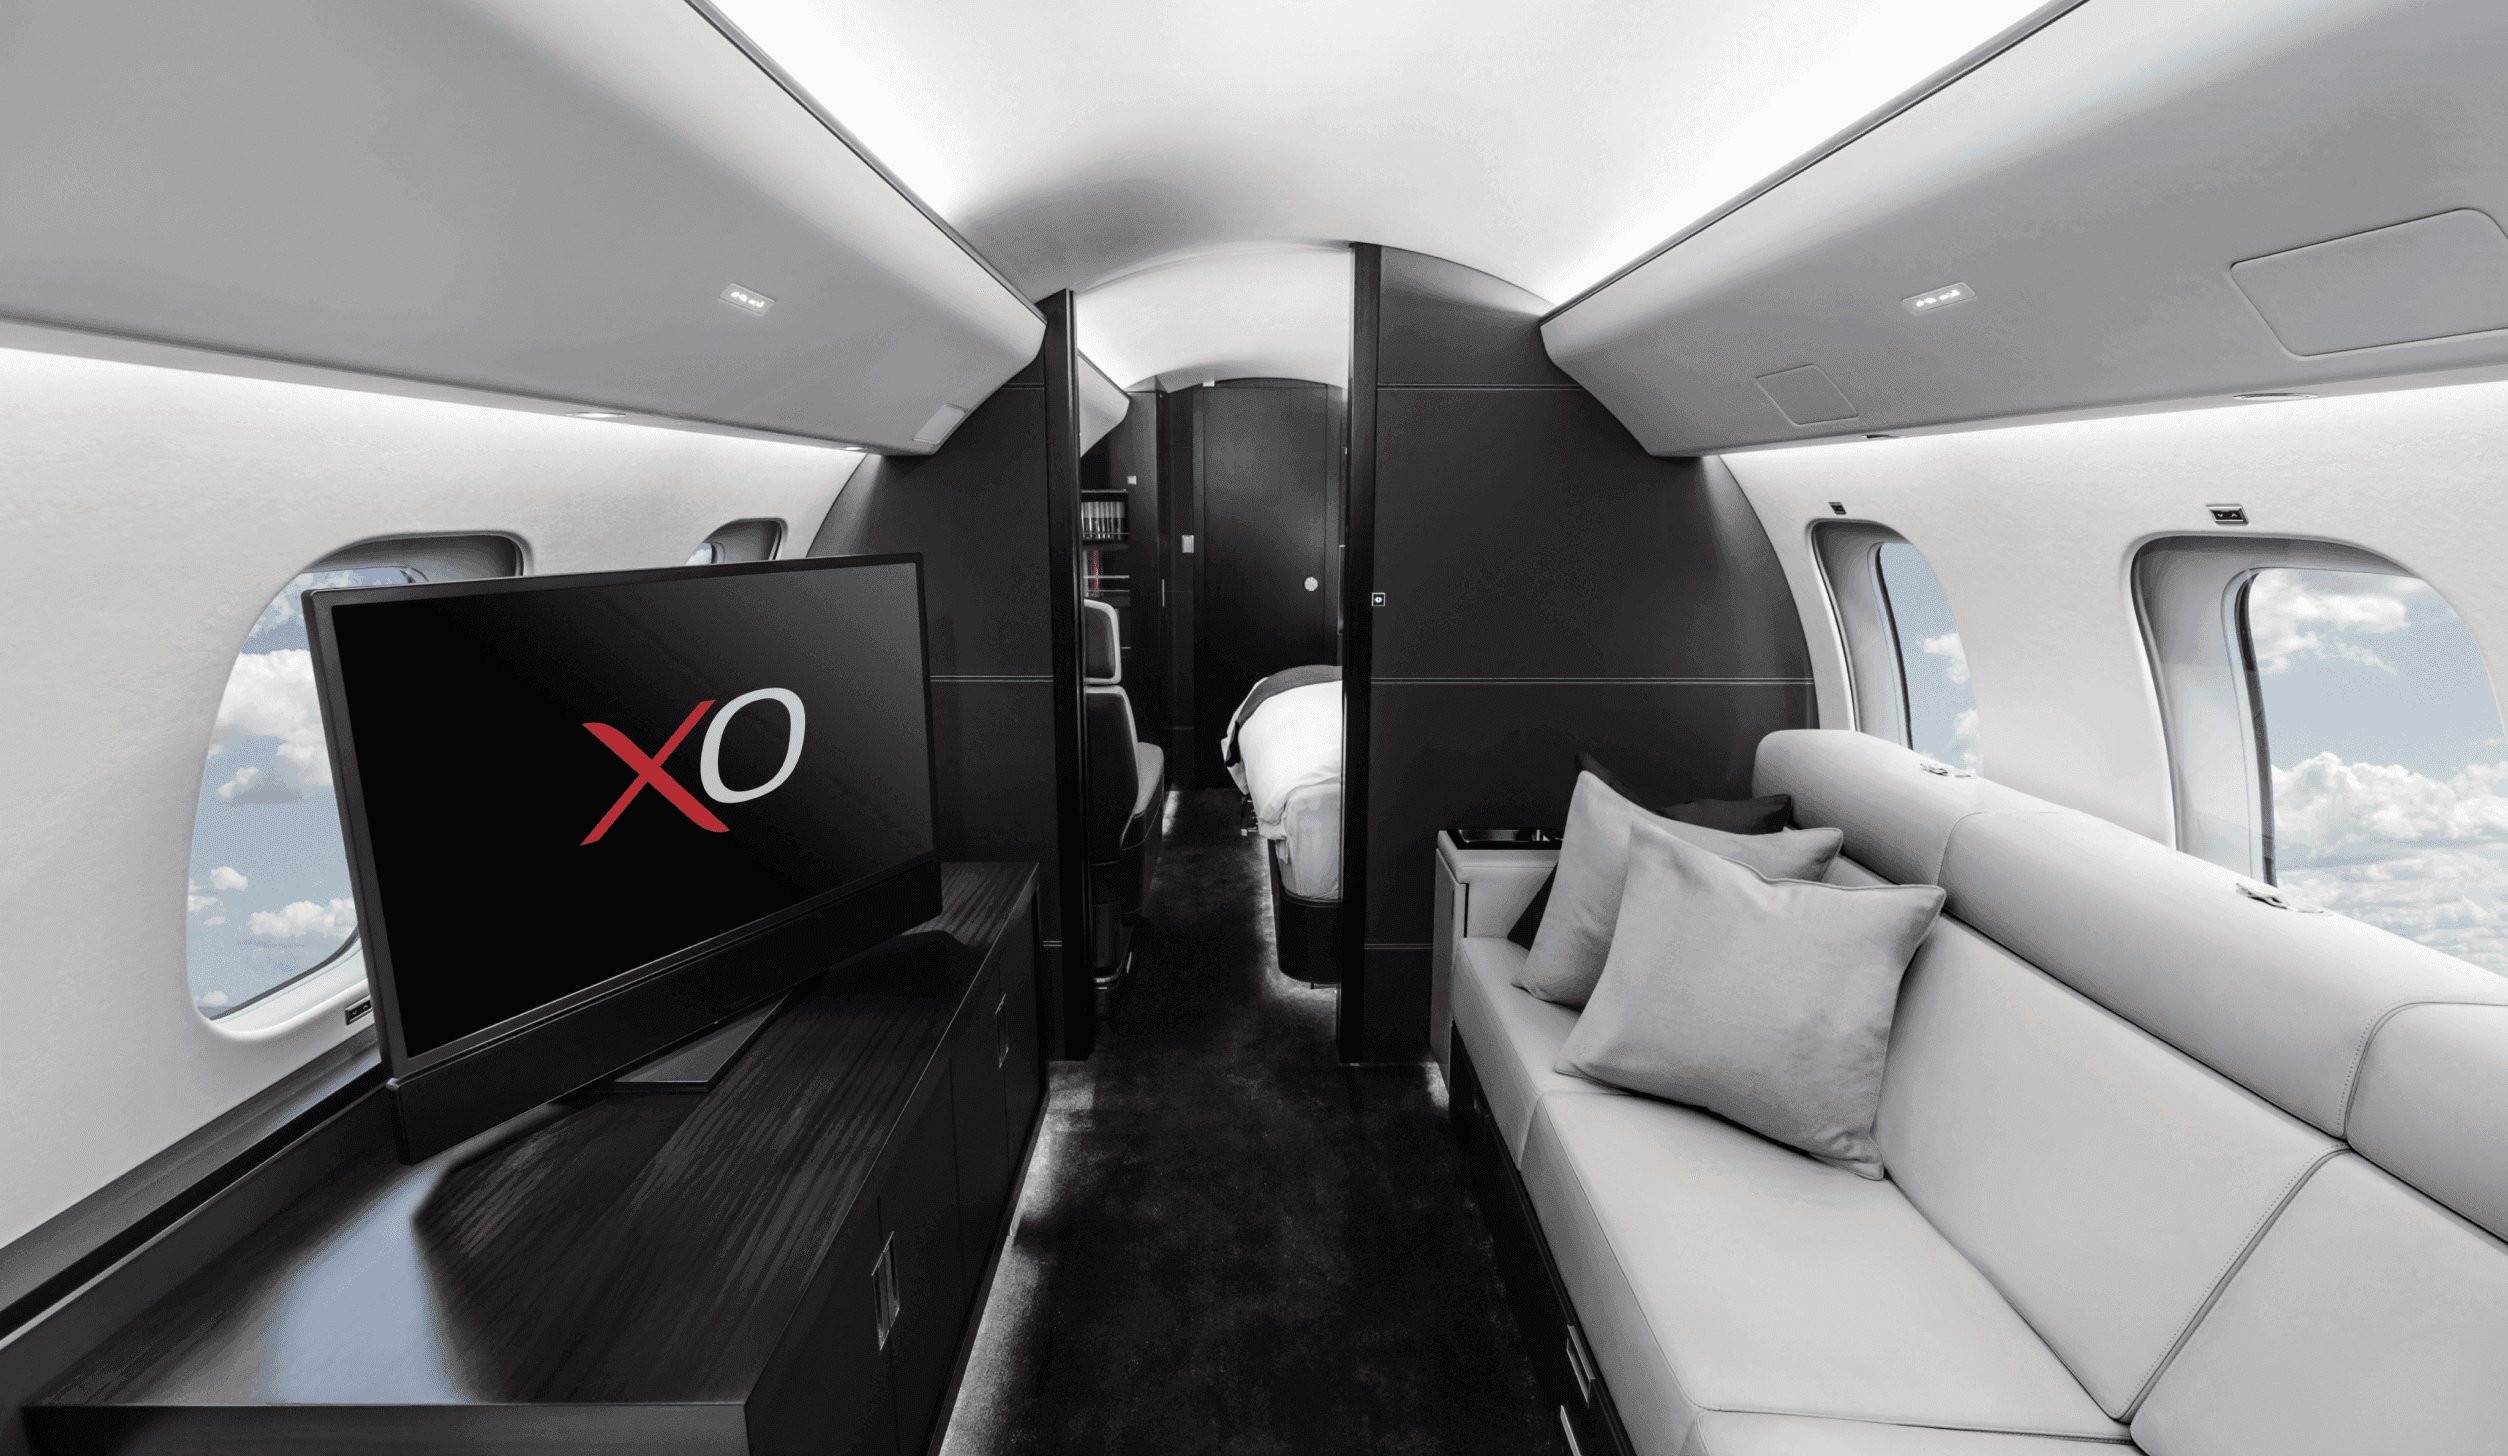 How to Avoid Surprises When Chartering a Private Jet